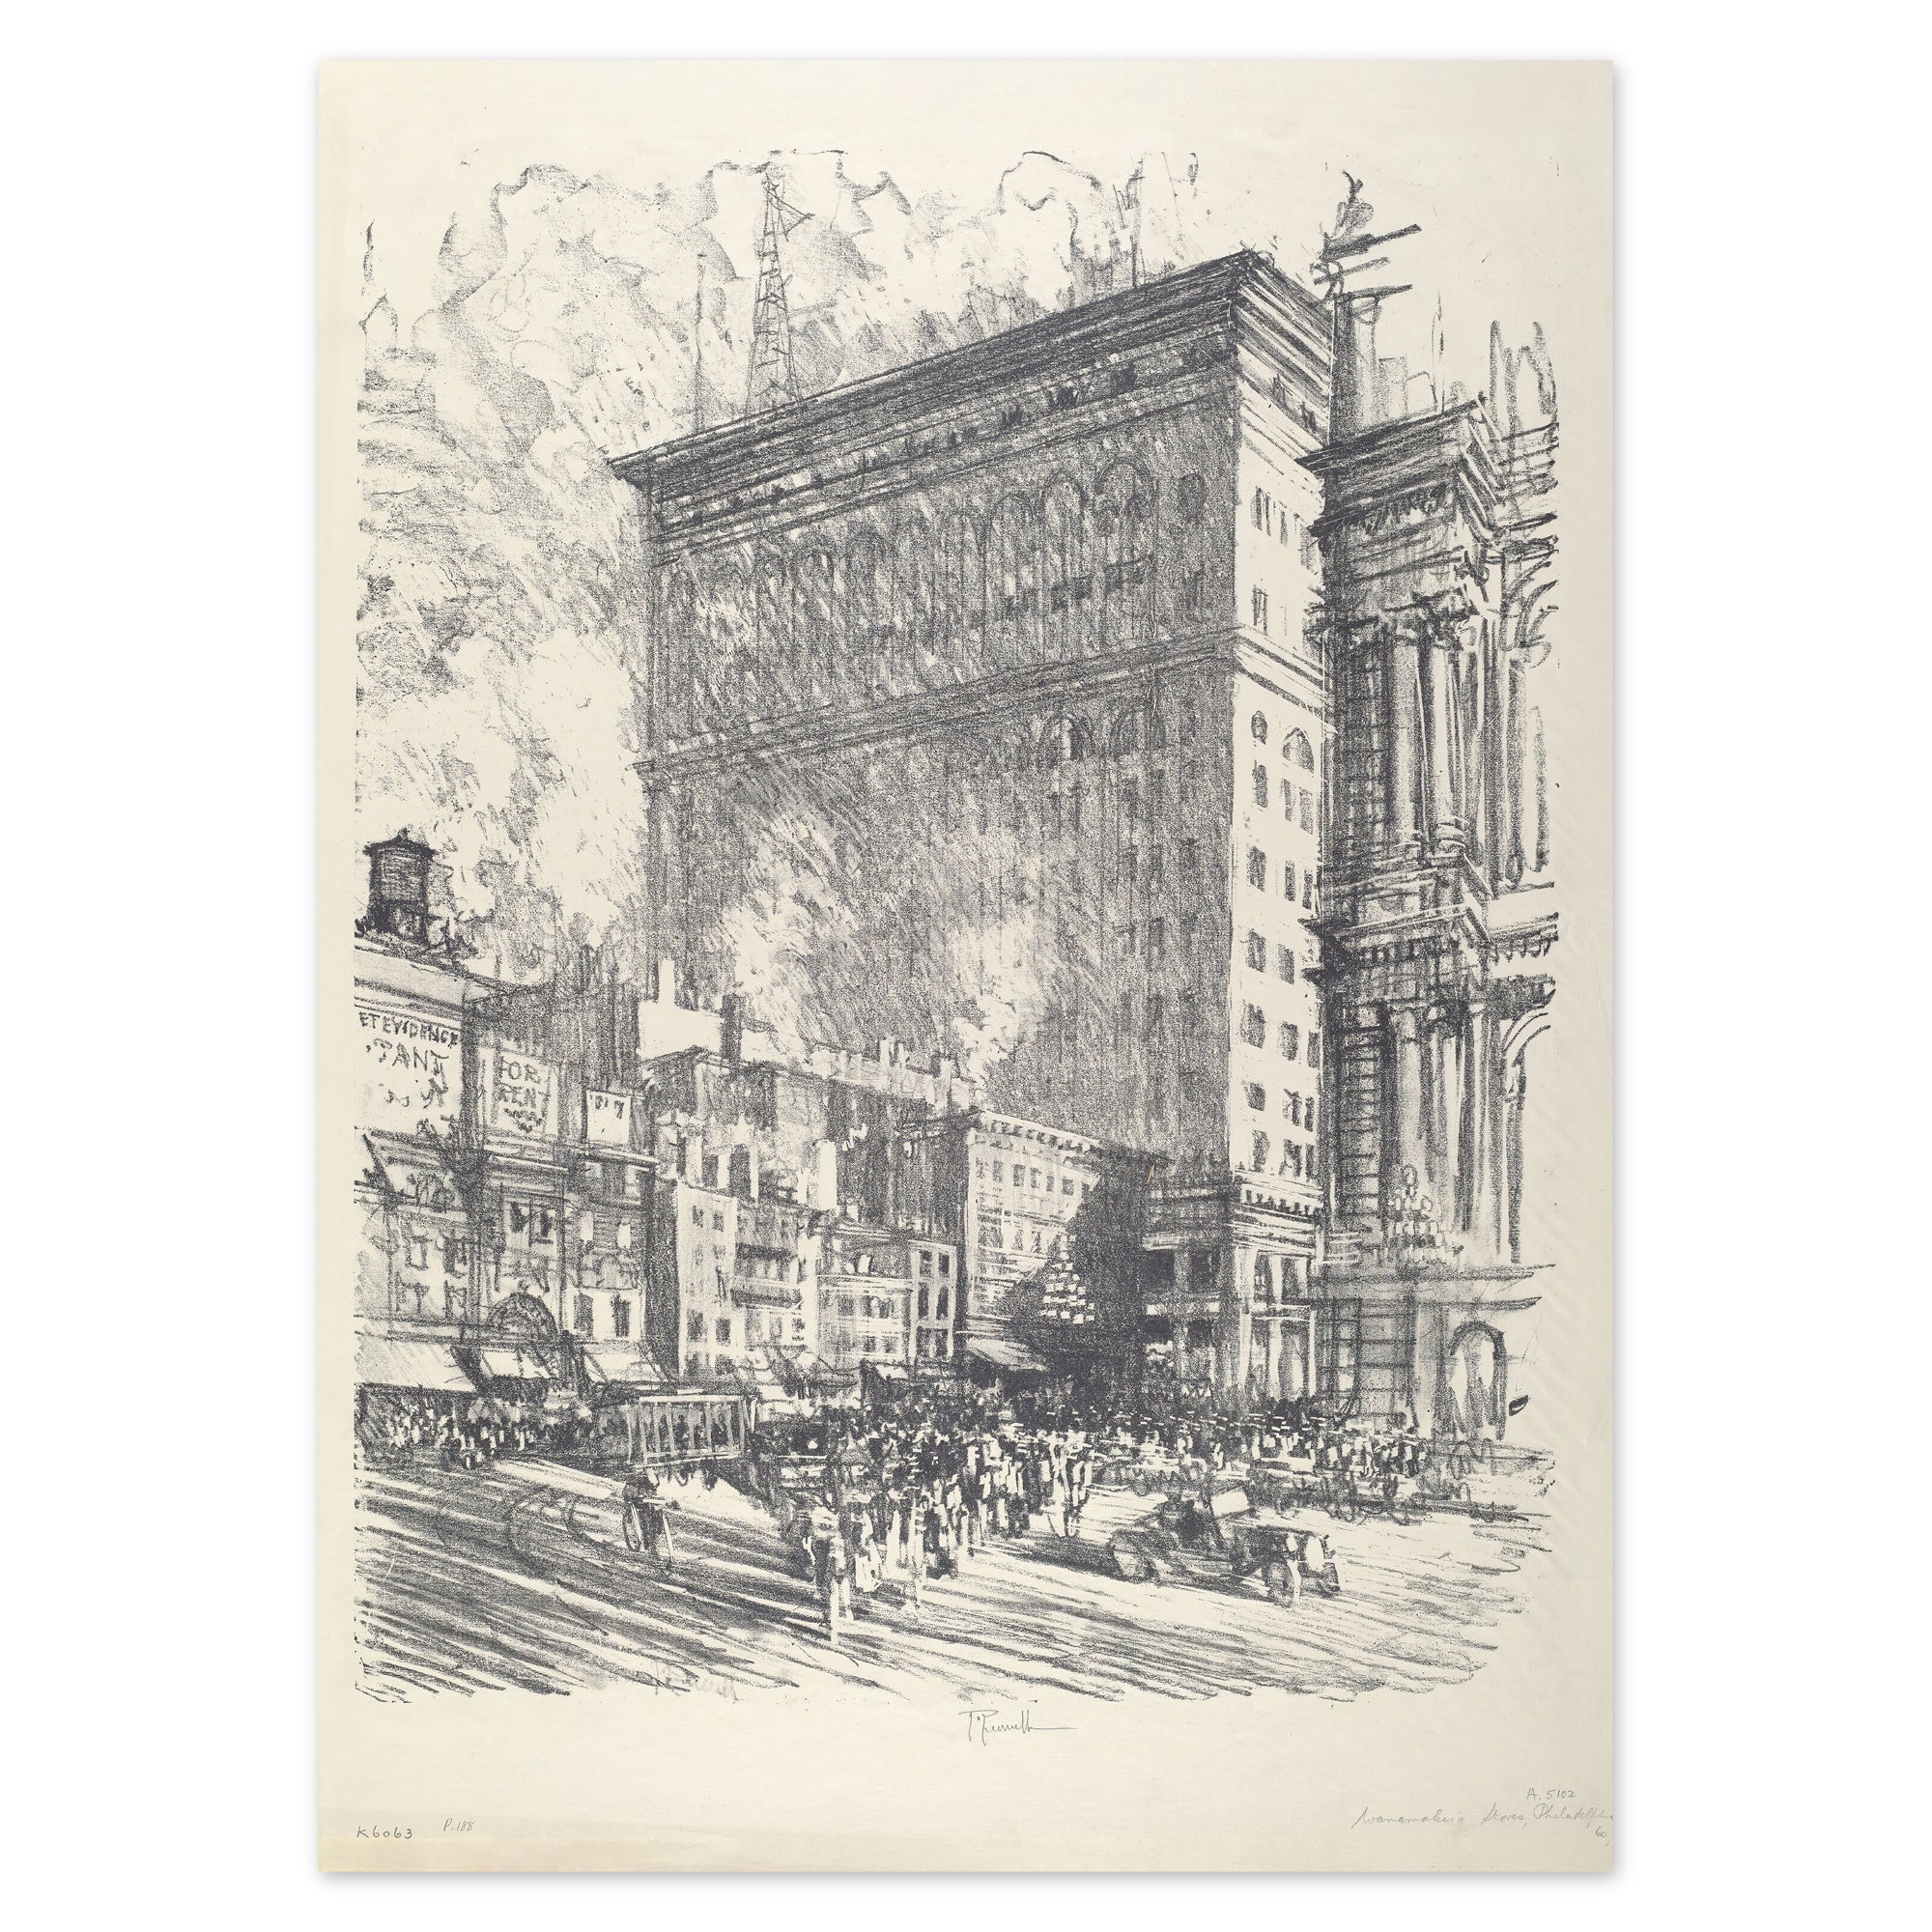 Poster. Beautiful old-school pencil drawing of the City Hall and Wanamaker building. Drawn by Joseph Pennell in 1912.